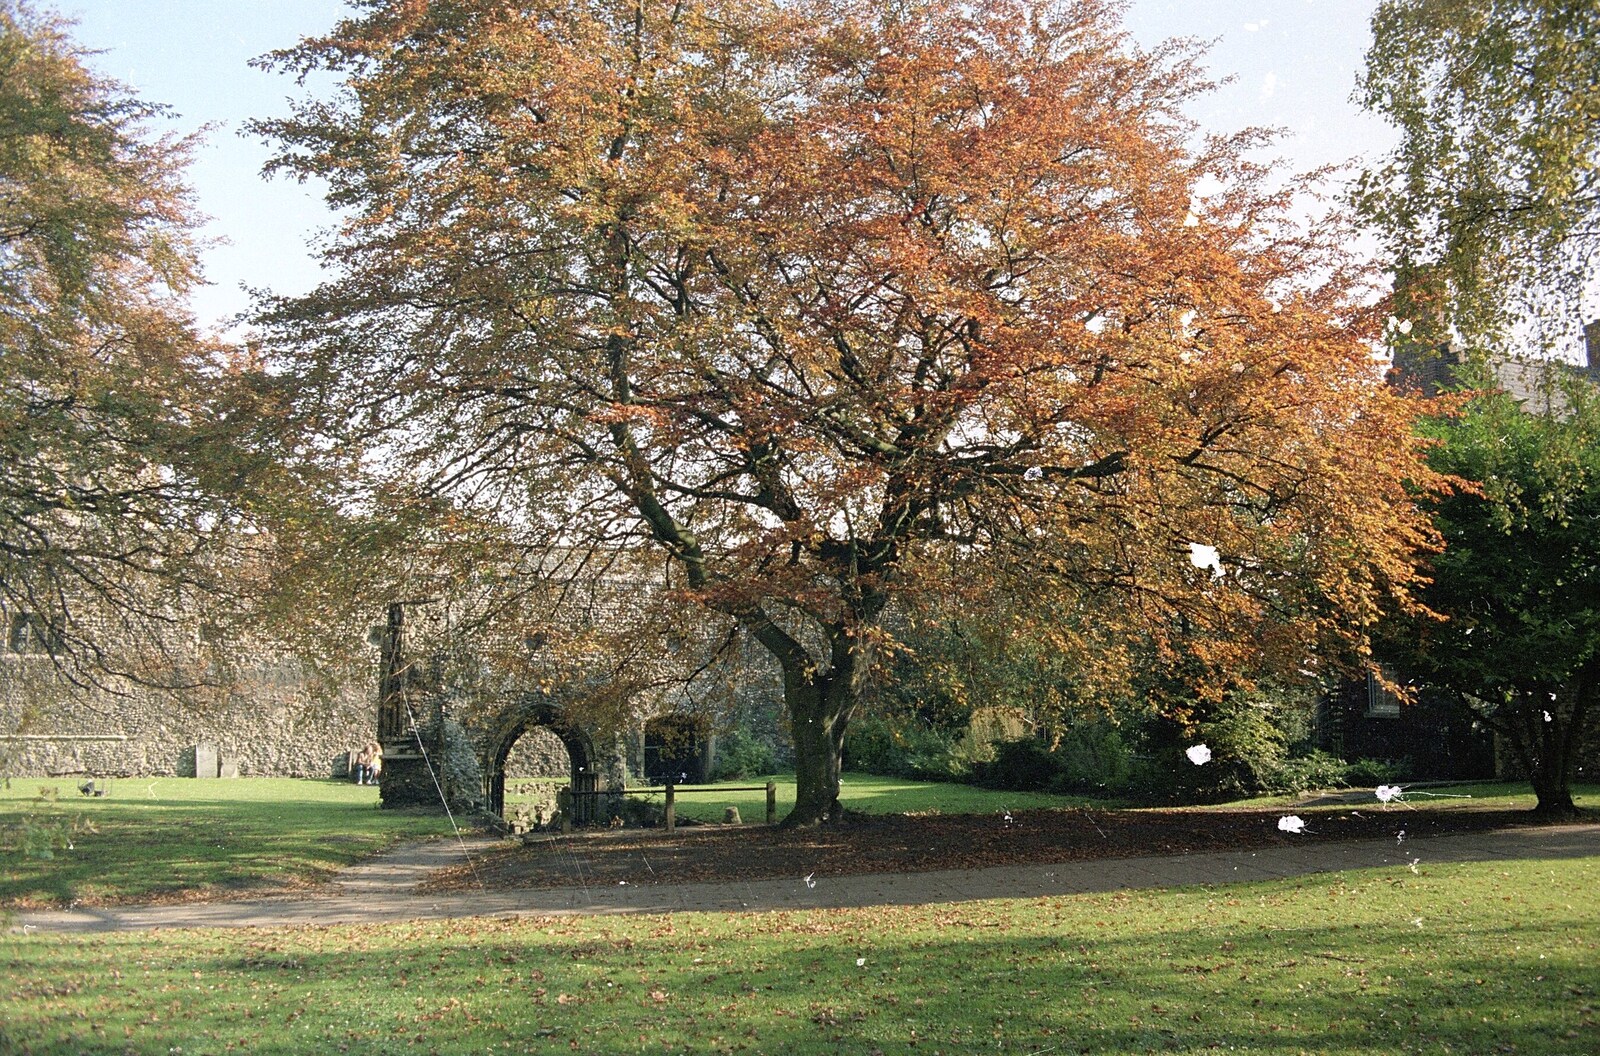 Cider Making (without Rosie), Stuston, Suffolk - 23rd September 1994: An Autumn tree in Norwich Cathedral's Close